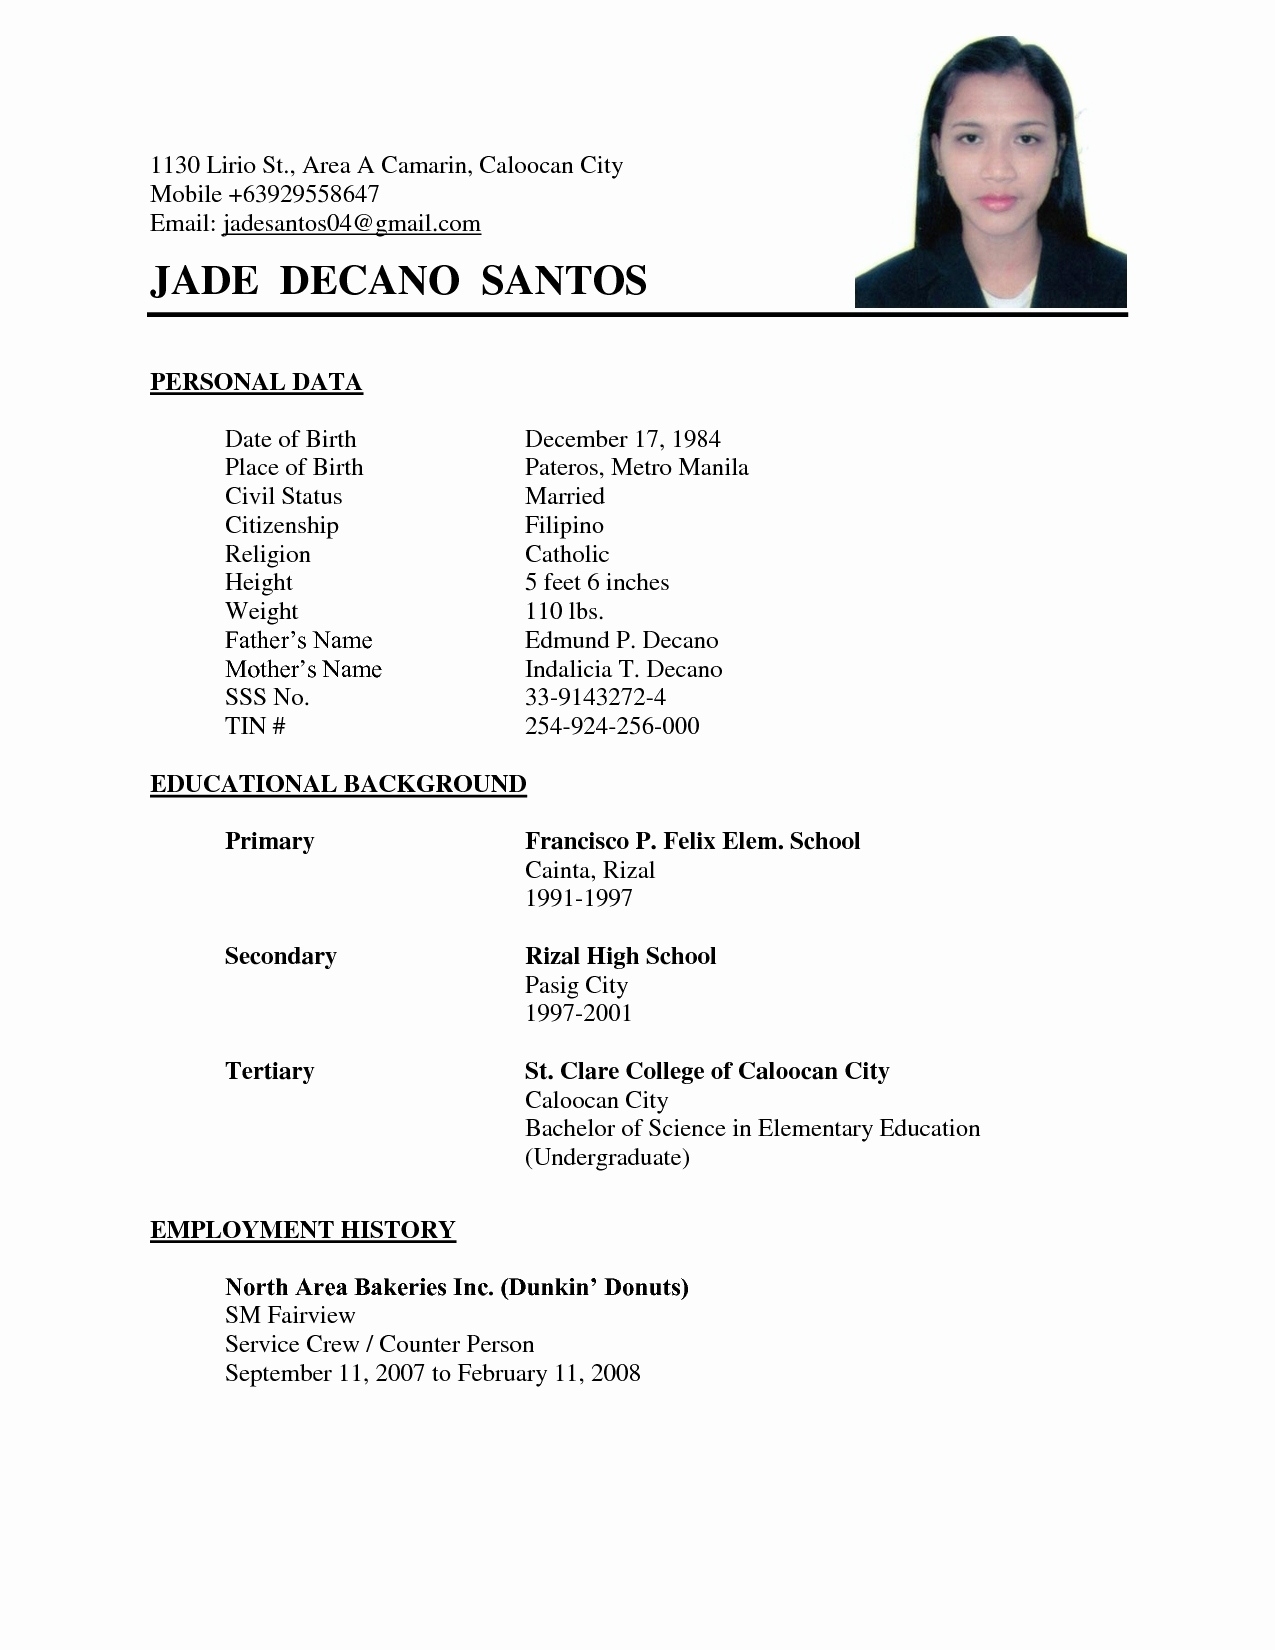 Resume Format With Photo 